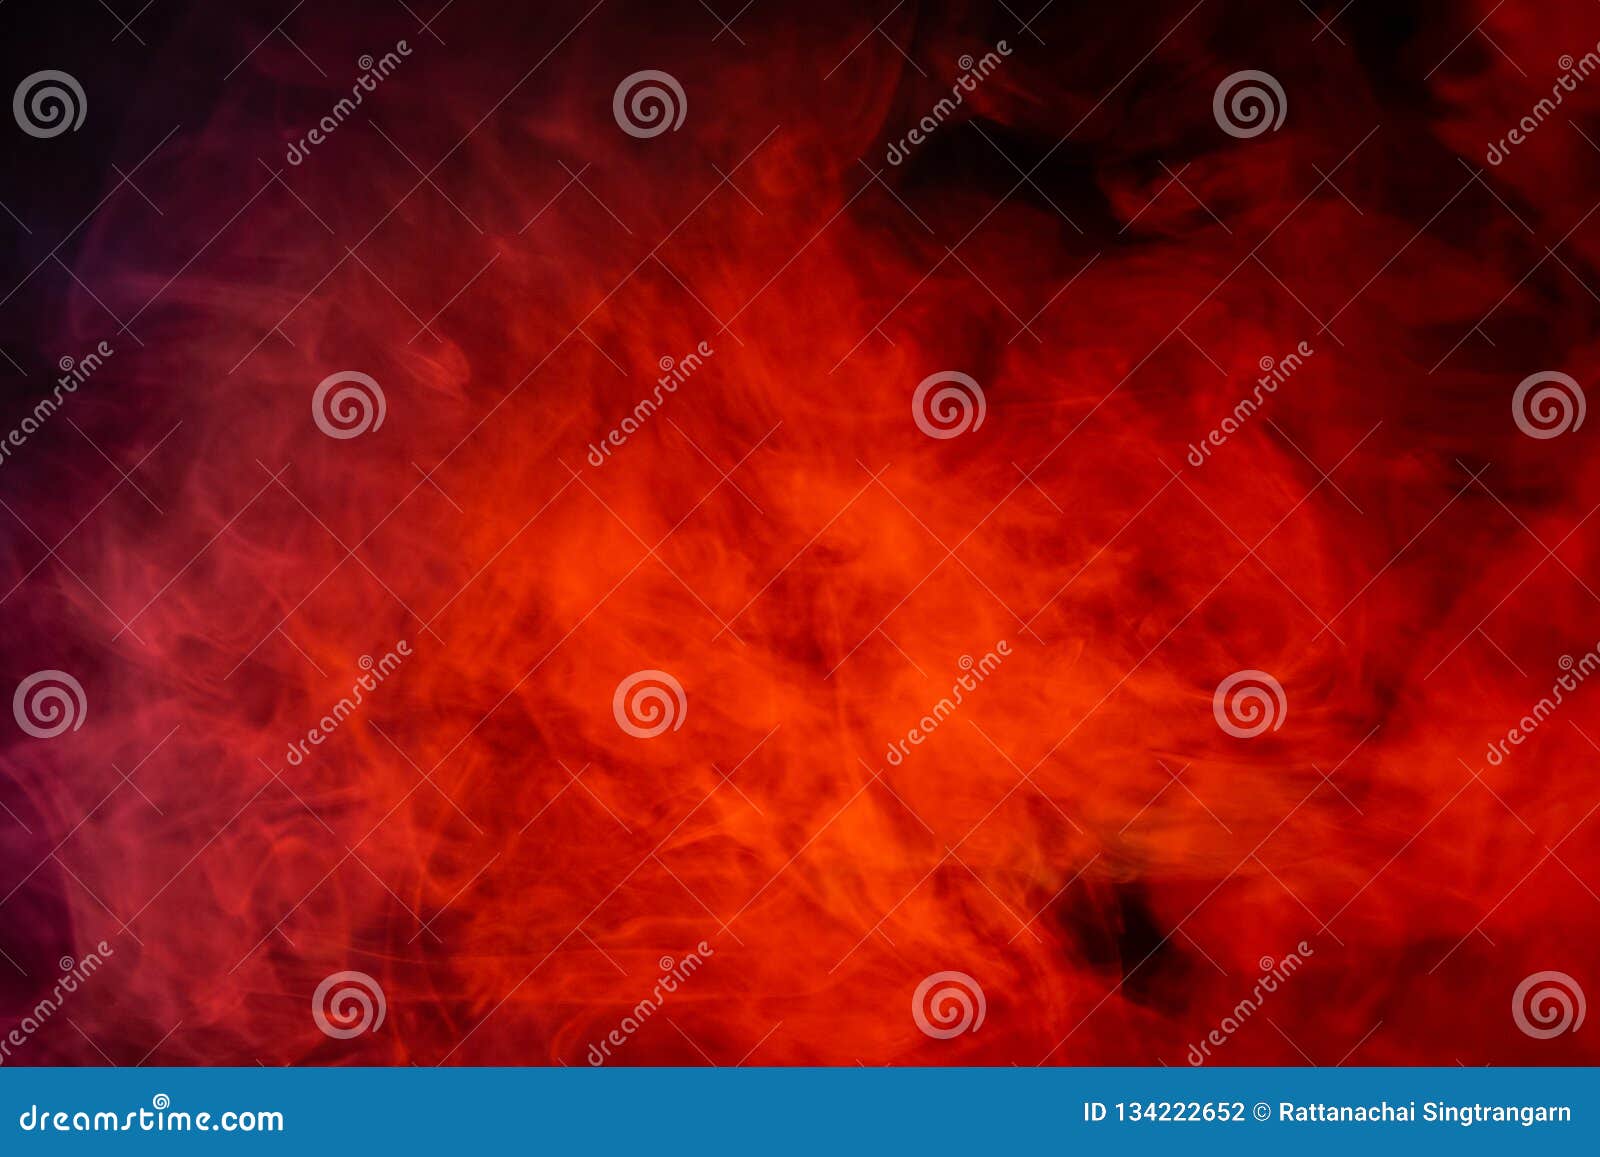 red smoke abstract background , fire hell concept lights